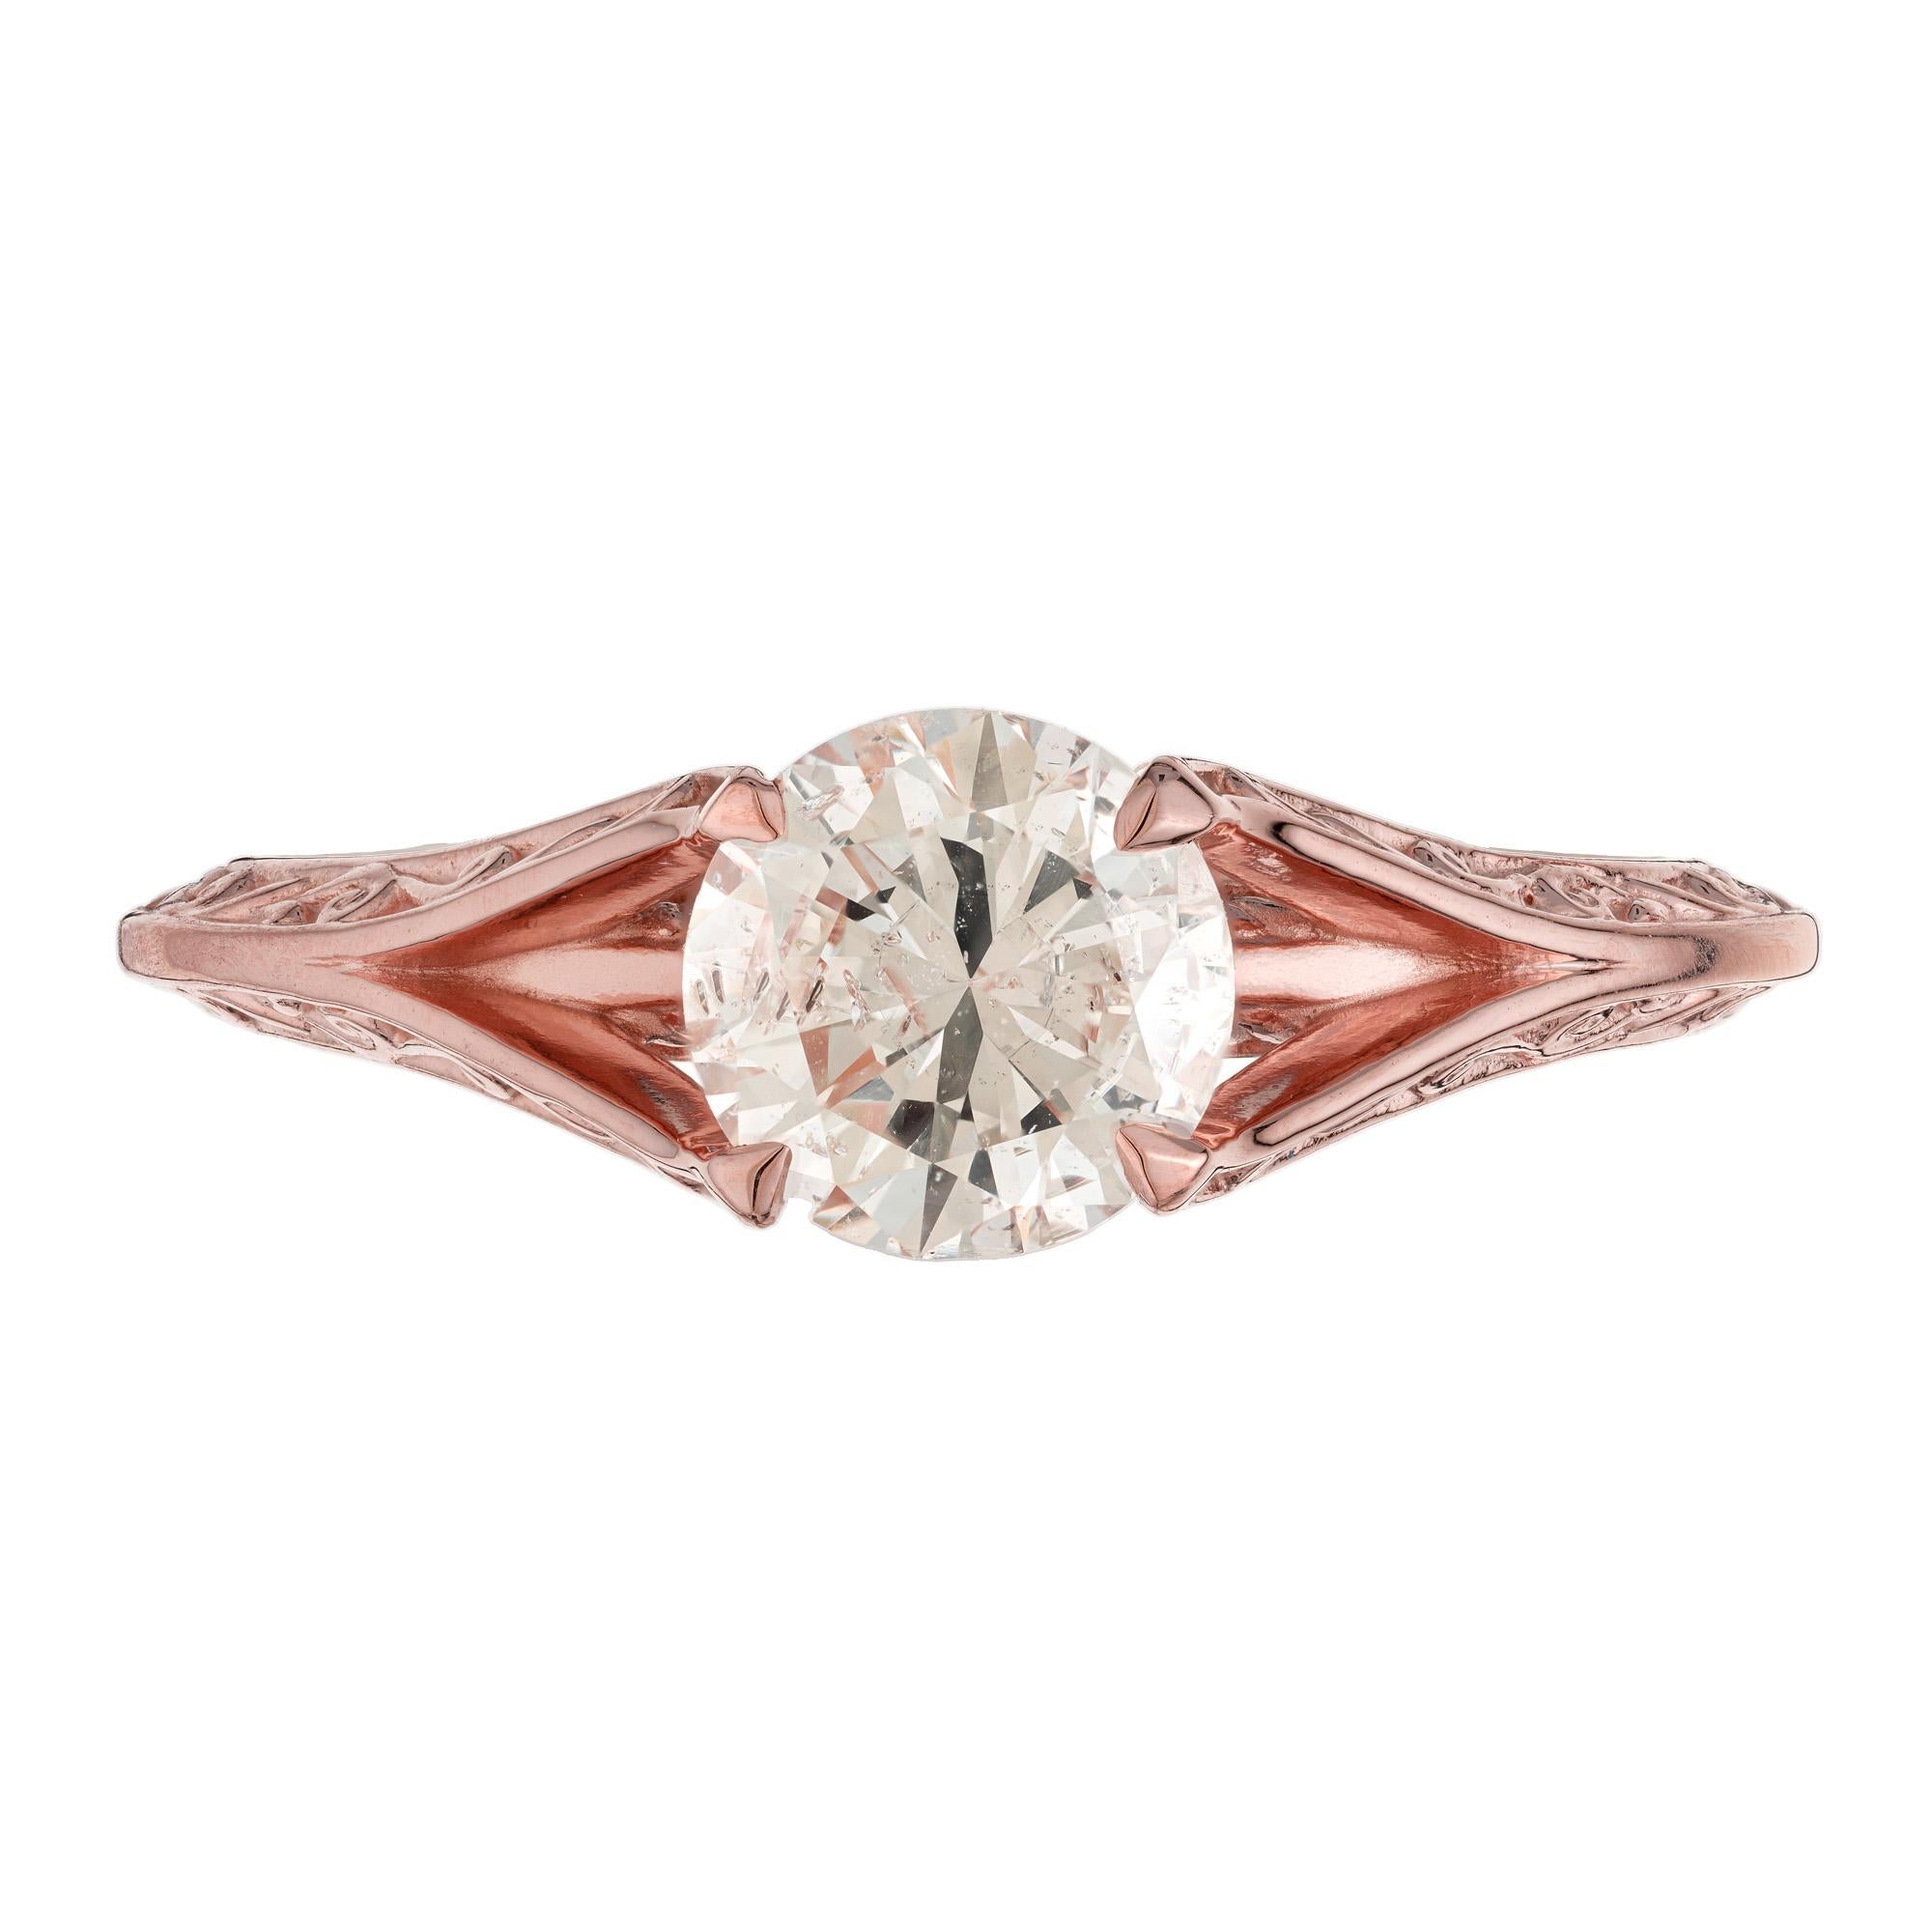 Solitaire style diamond engagement ring. Set with a 1.05ct round center stone in a 14k rose gold split shank mounting. This four prong ring is etched beautifully with precision detailing. The simplicity of the solitaire design allows the diamond to